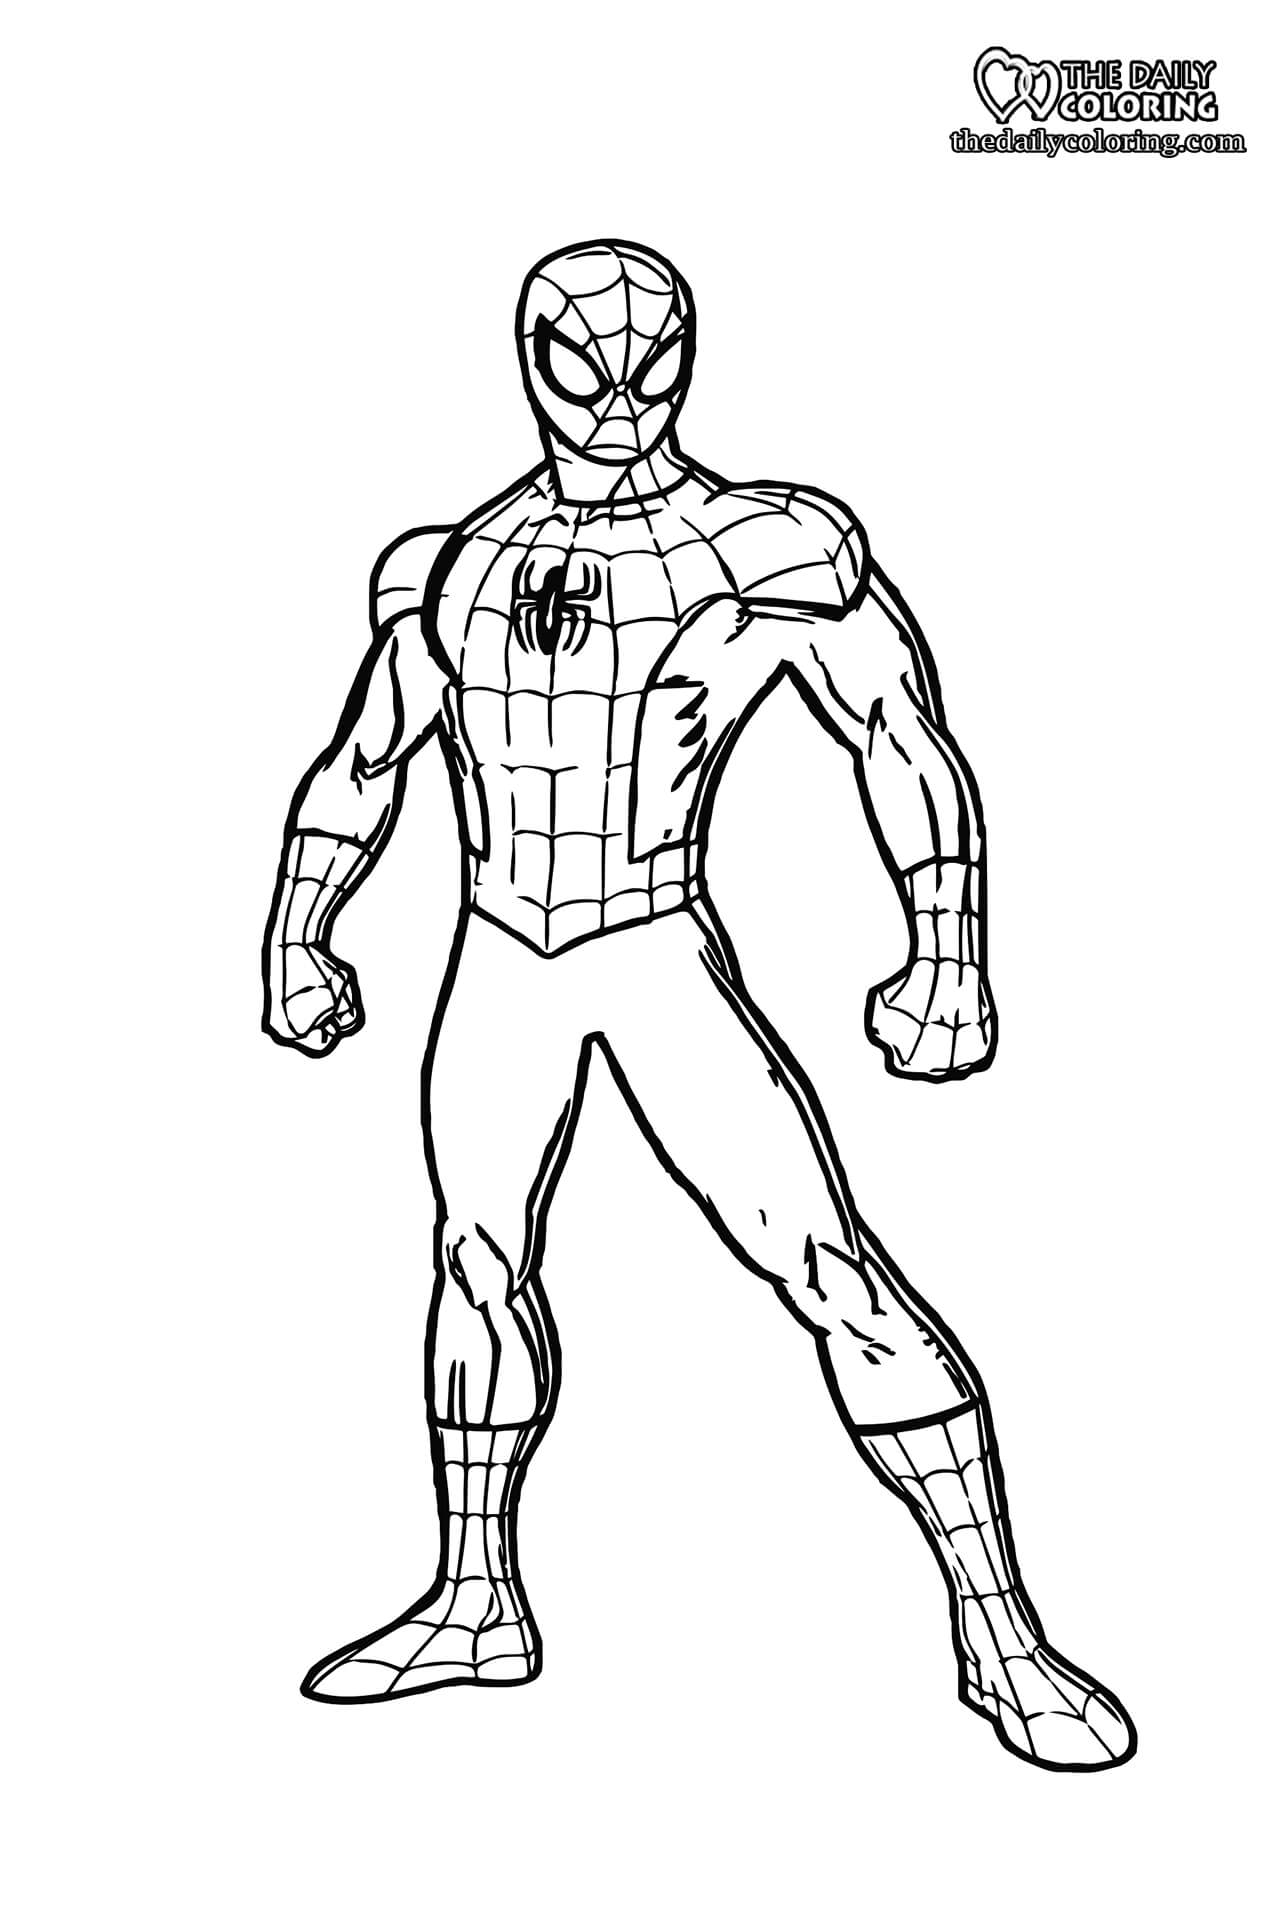 Spiderman Coloring Pages 21+ FULL HD   The Daily Coloring